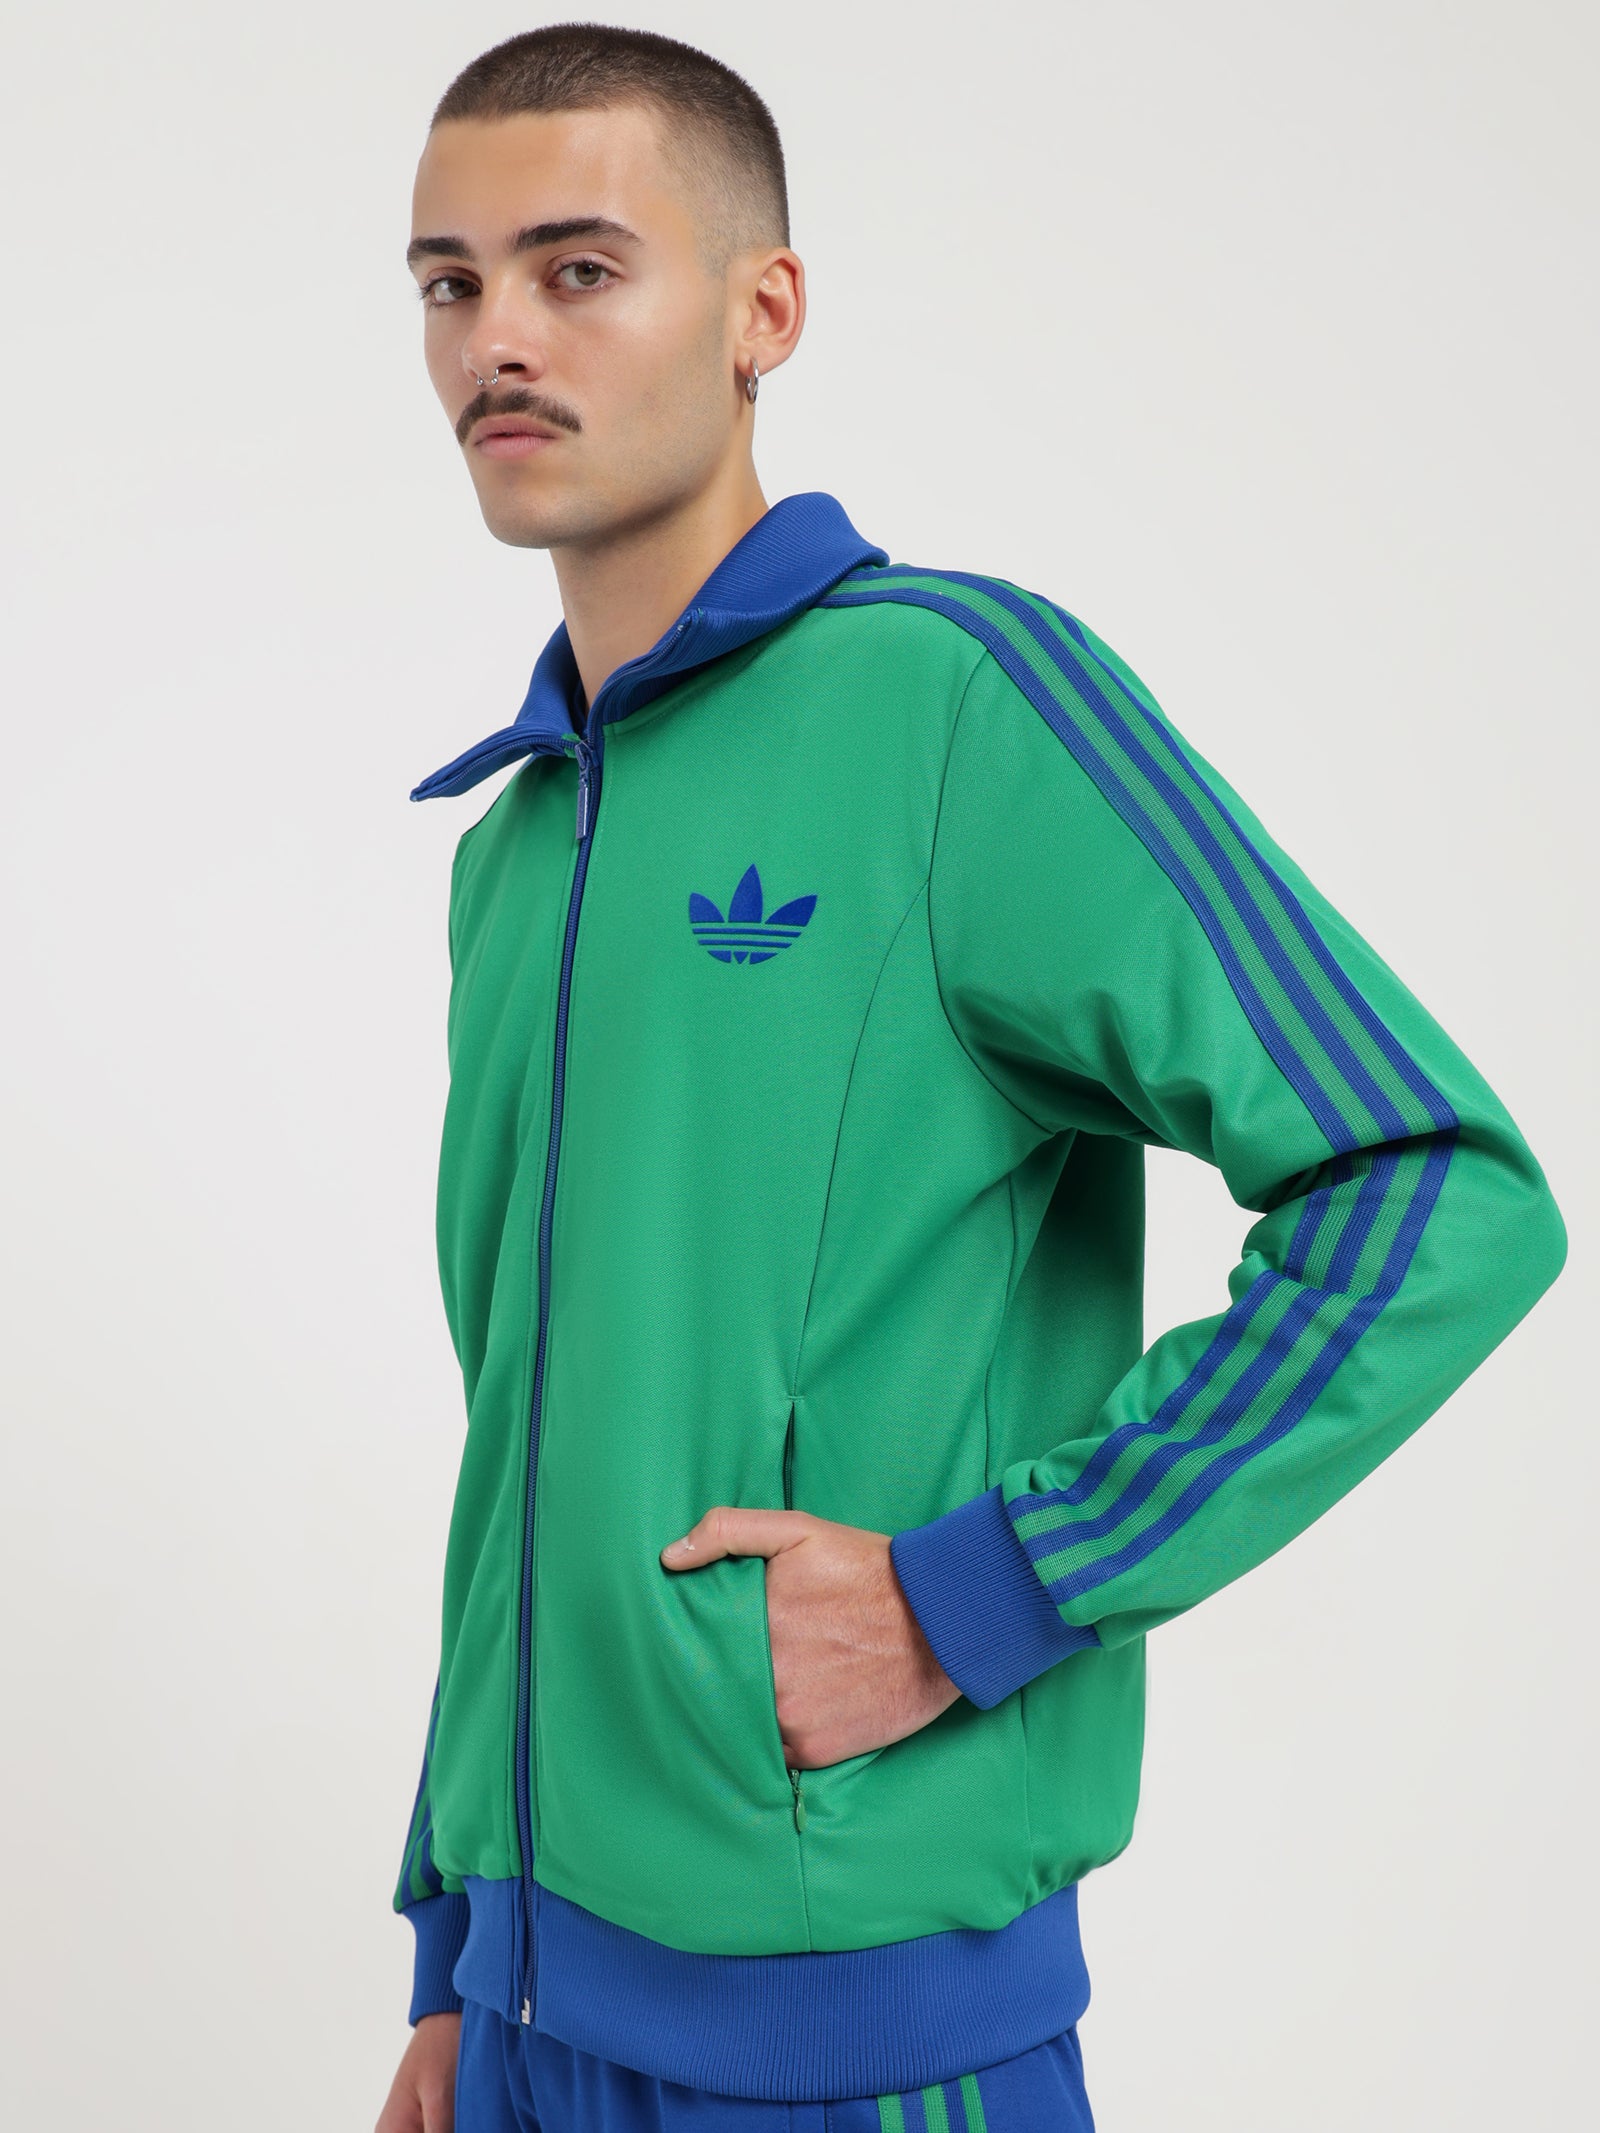 ADICOLOR 70s Heritage Now Striped Track Top in Green - Glue Store